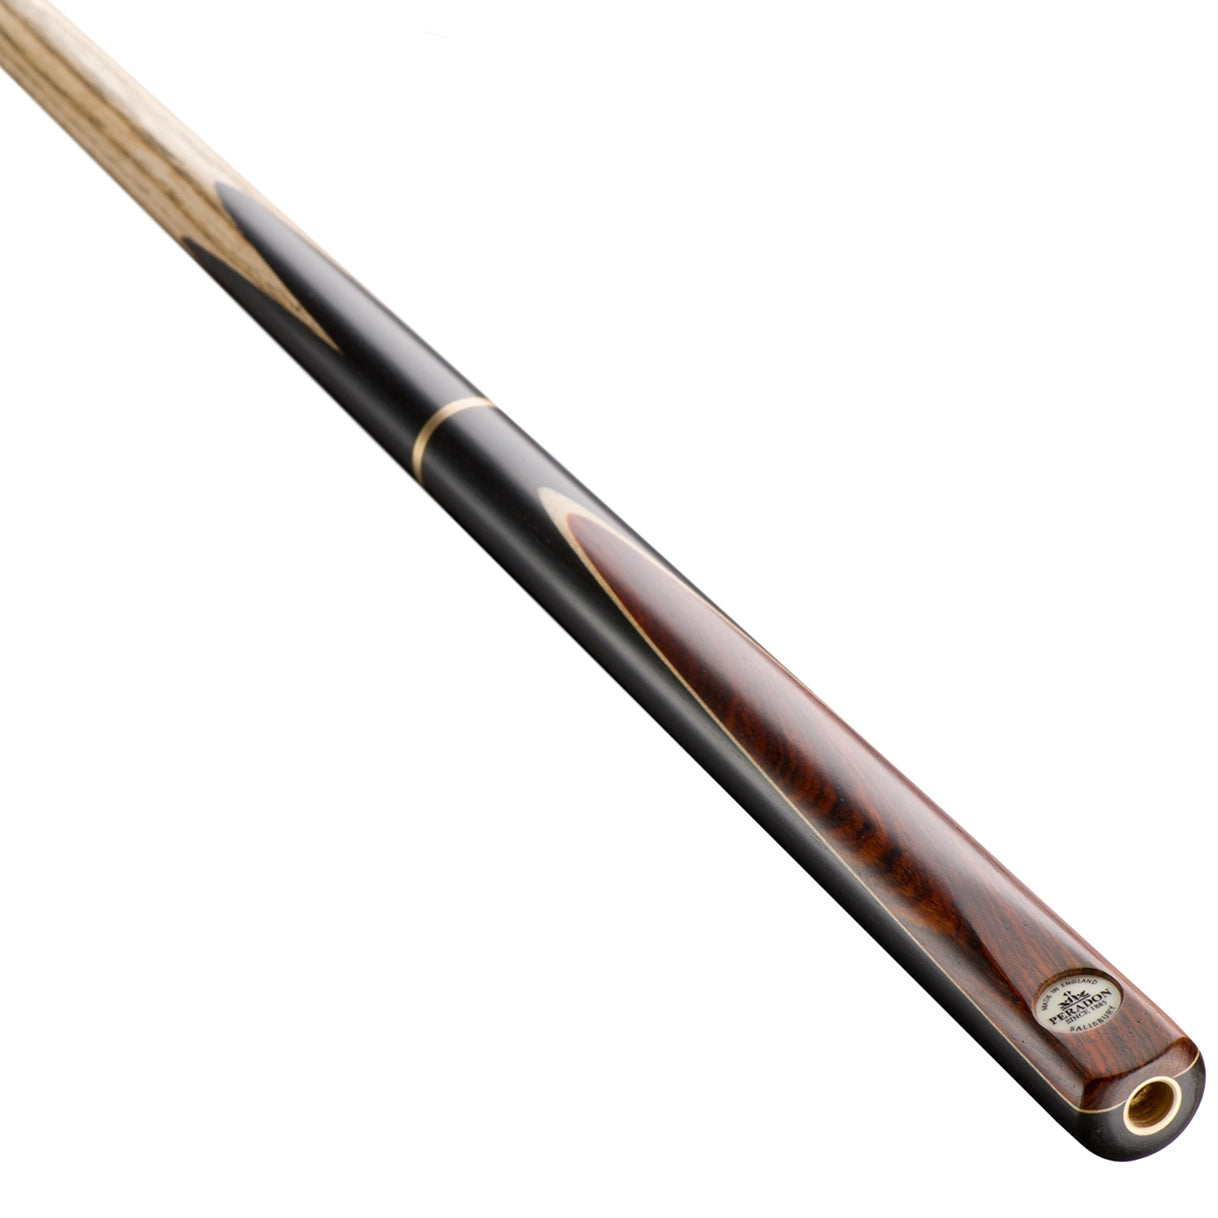 Peradon Salisbury 3/4 Jointed Snooker Cue. On angle view